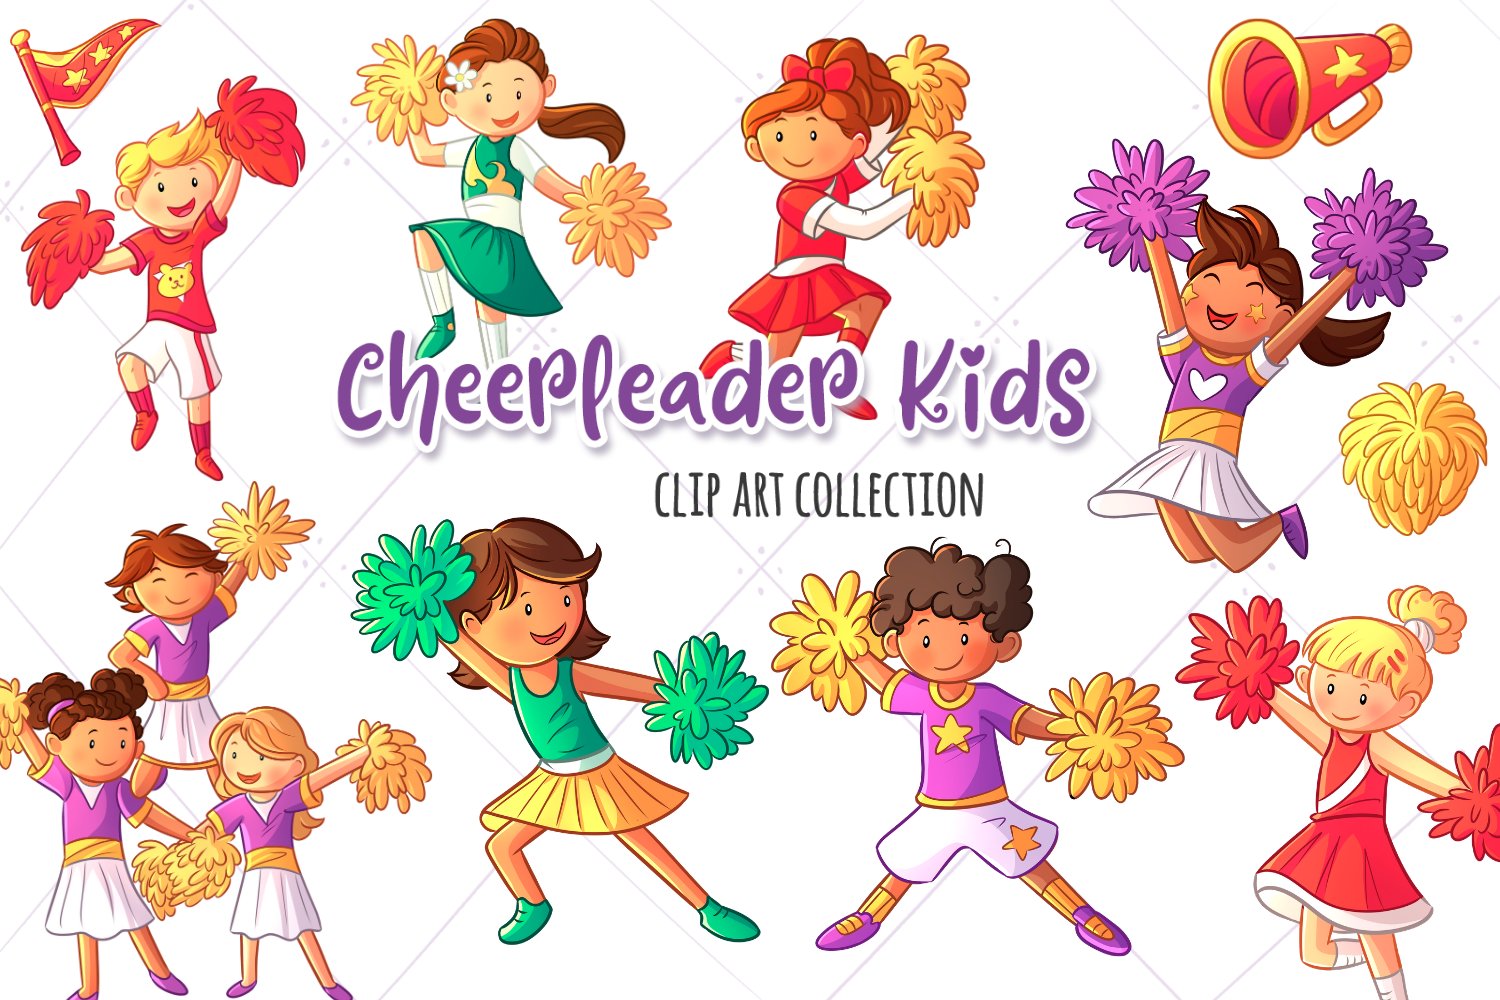 Cheerleader Kids Clip Art Collection cover image.